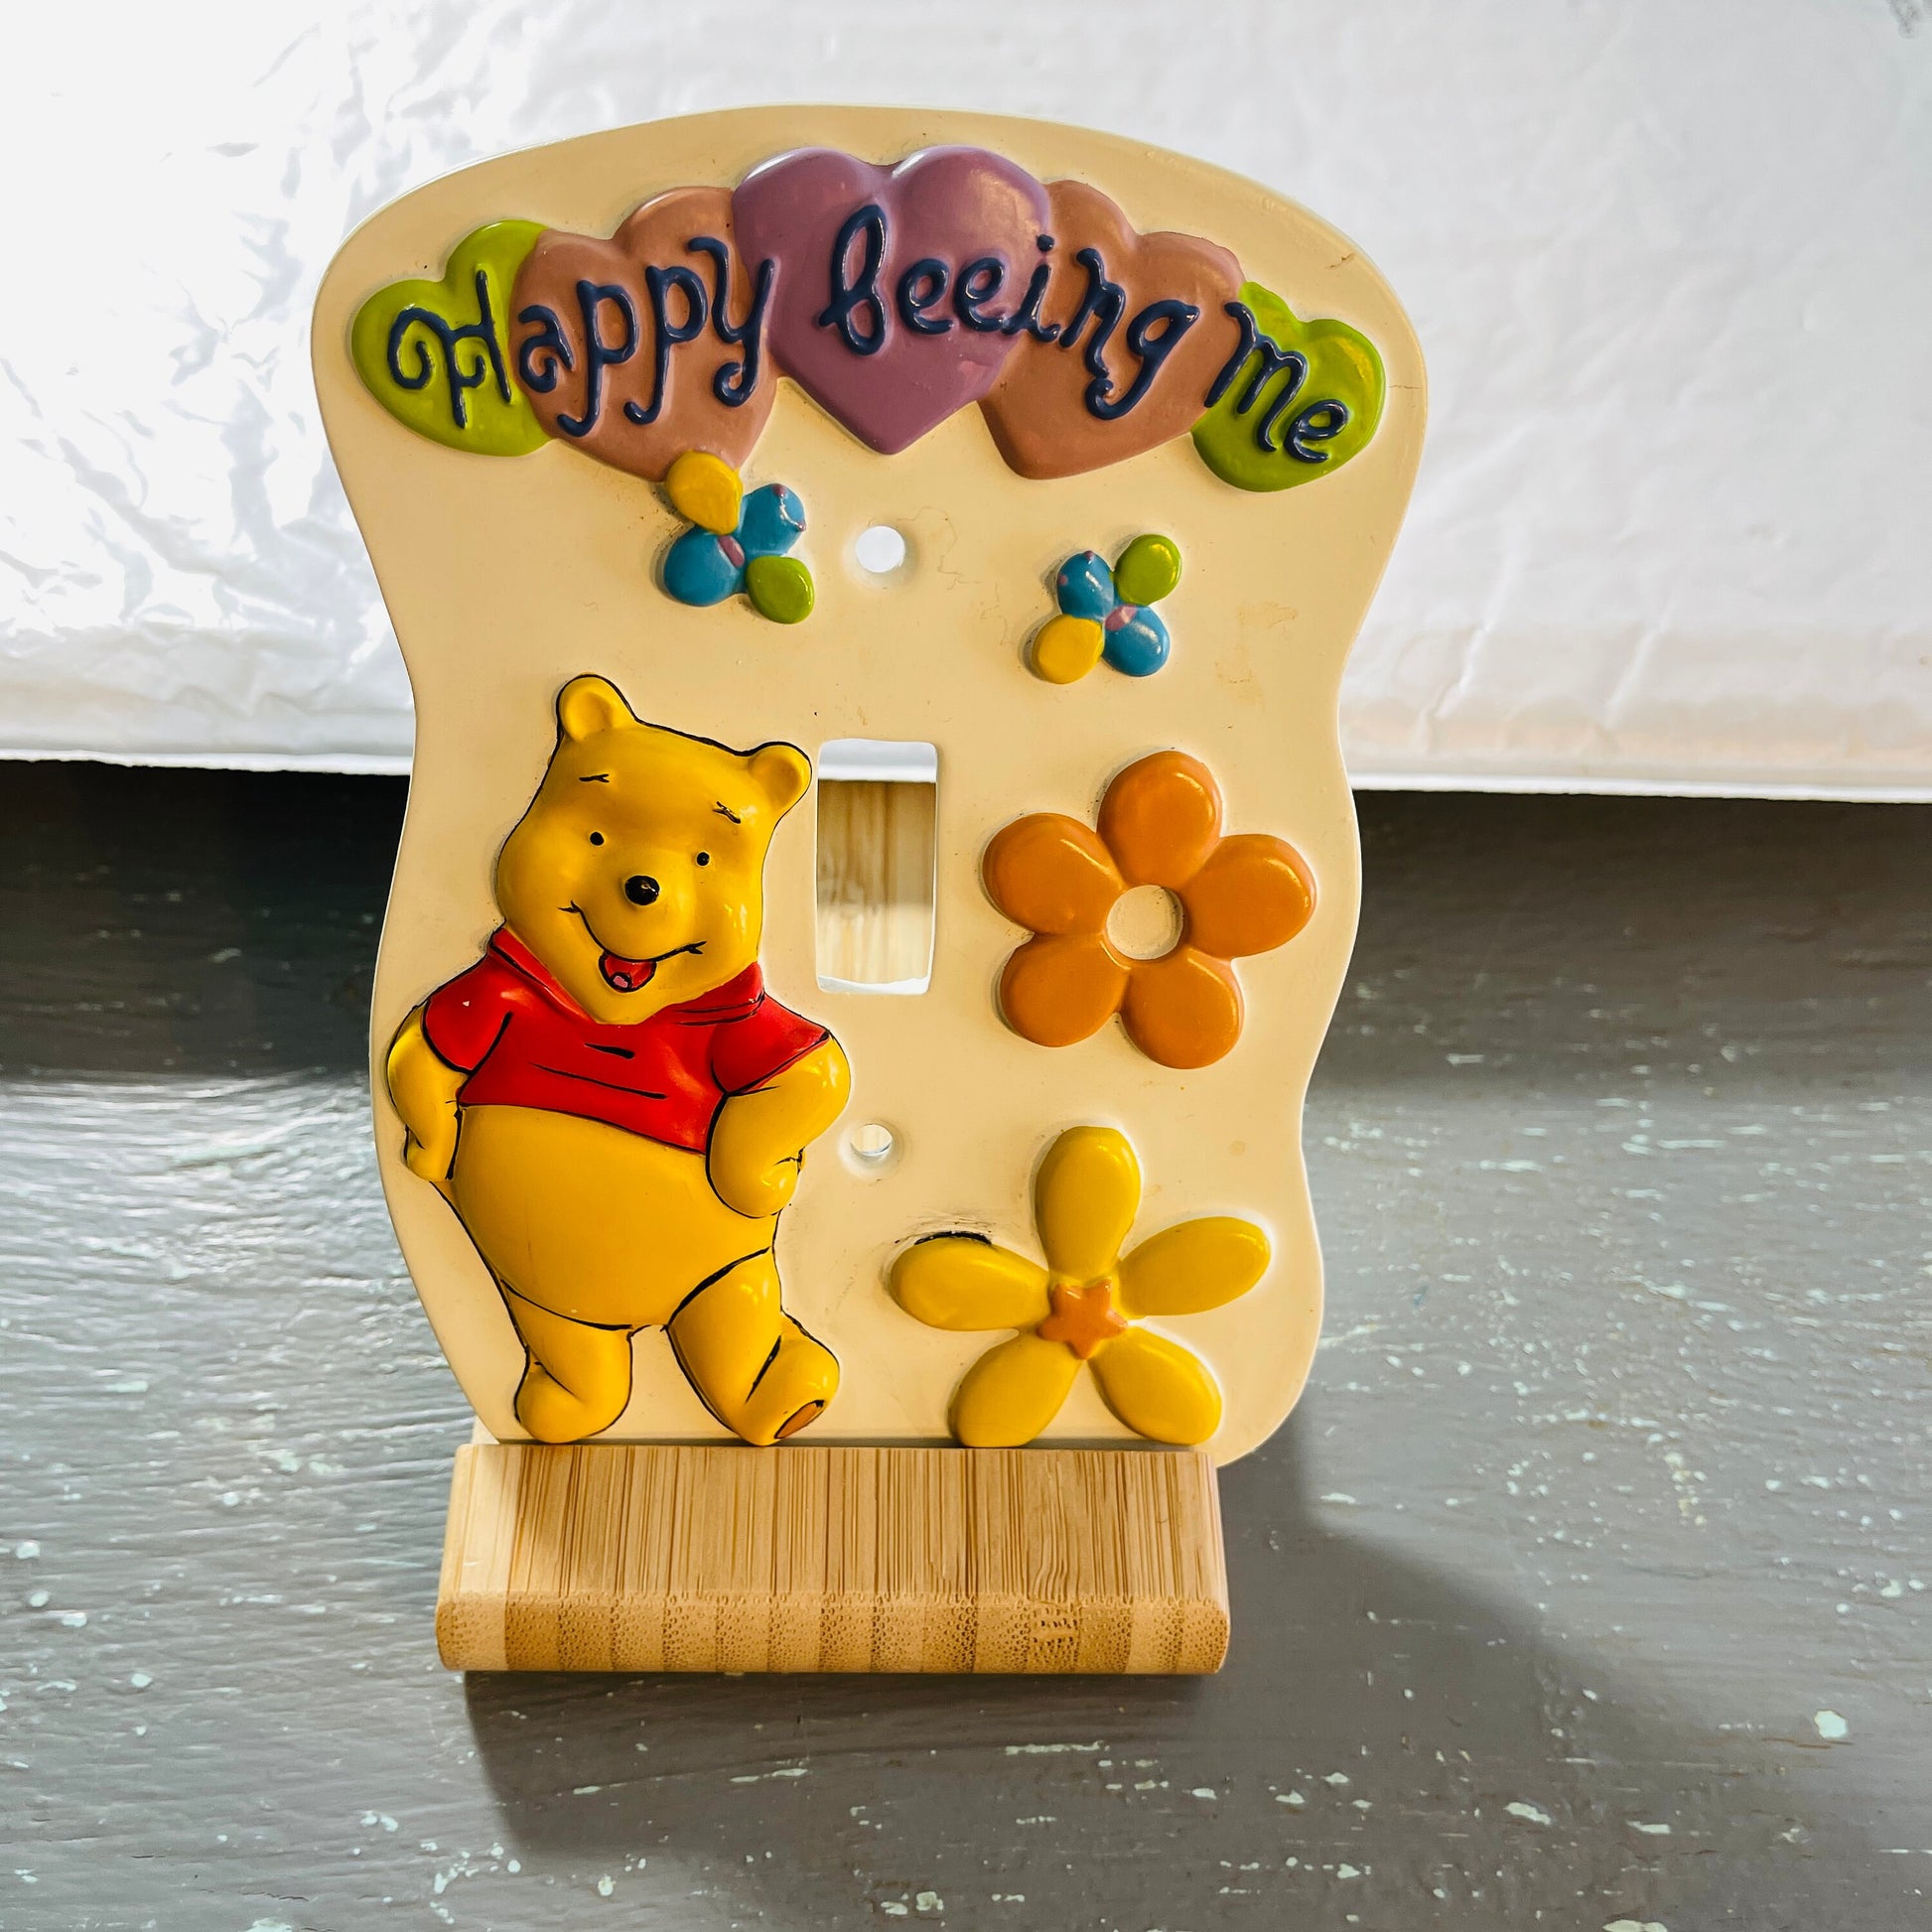 Winnie the pooh, Happy Beeing Me, Vintage Switchplate Cover